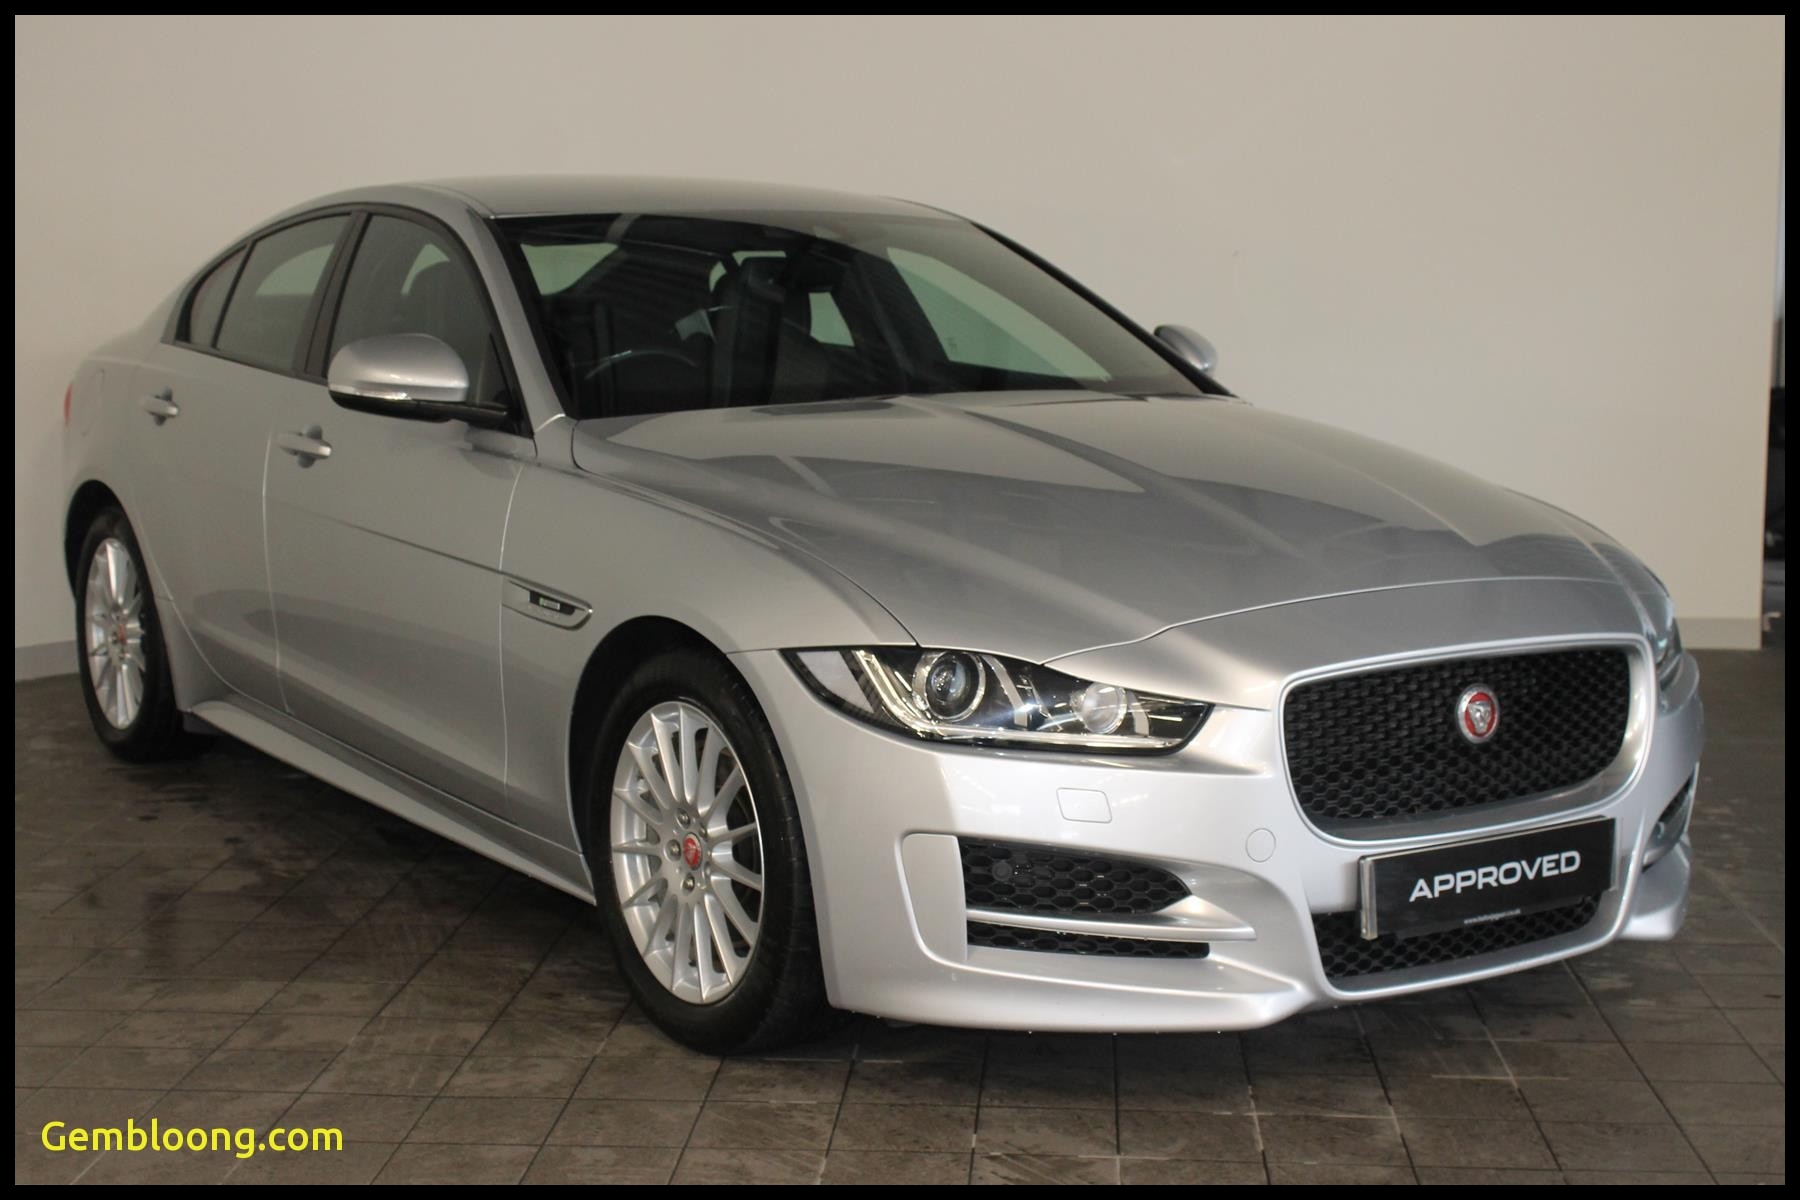 Used Cars Cleveland Lovely Cars for Sale Near Me Leeds Inspirational Used 2016 Jaguar Xe 2